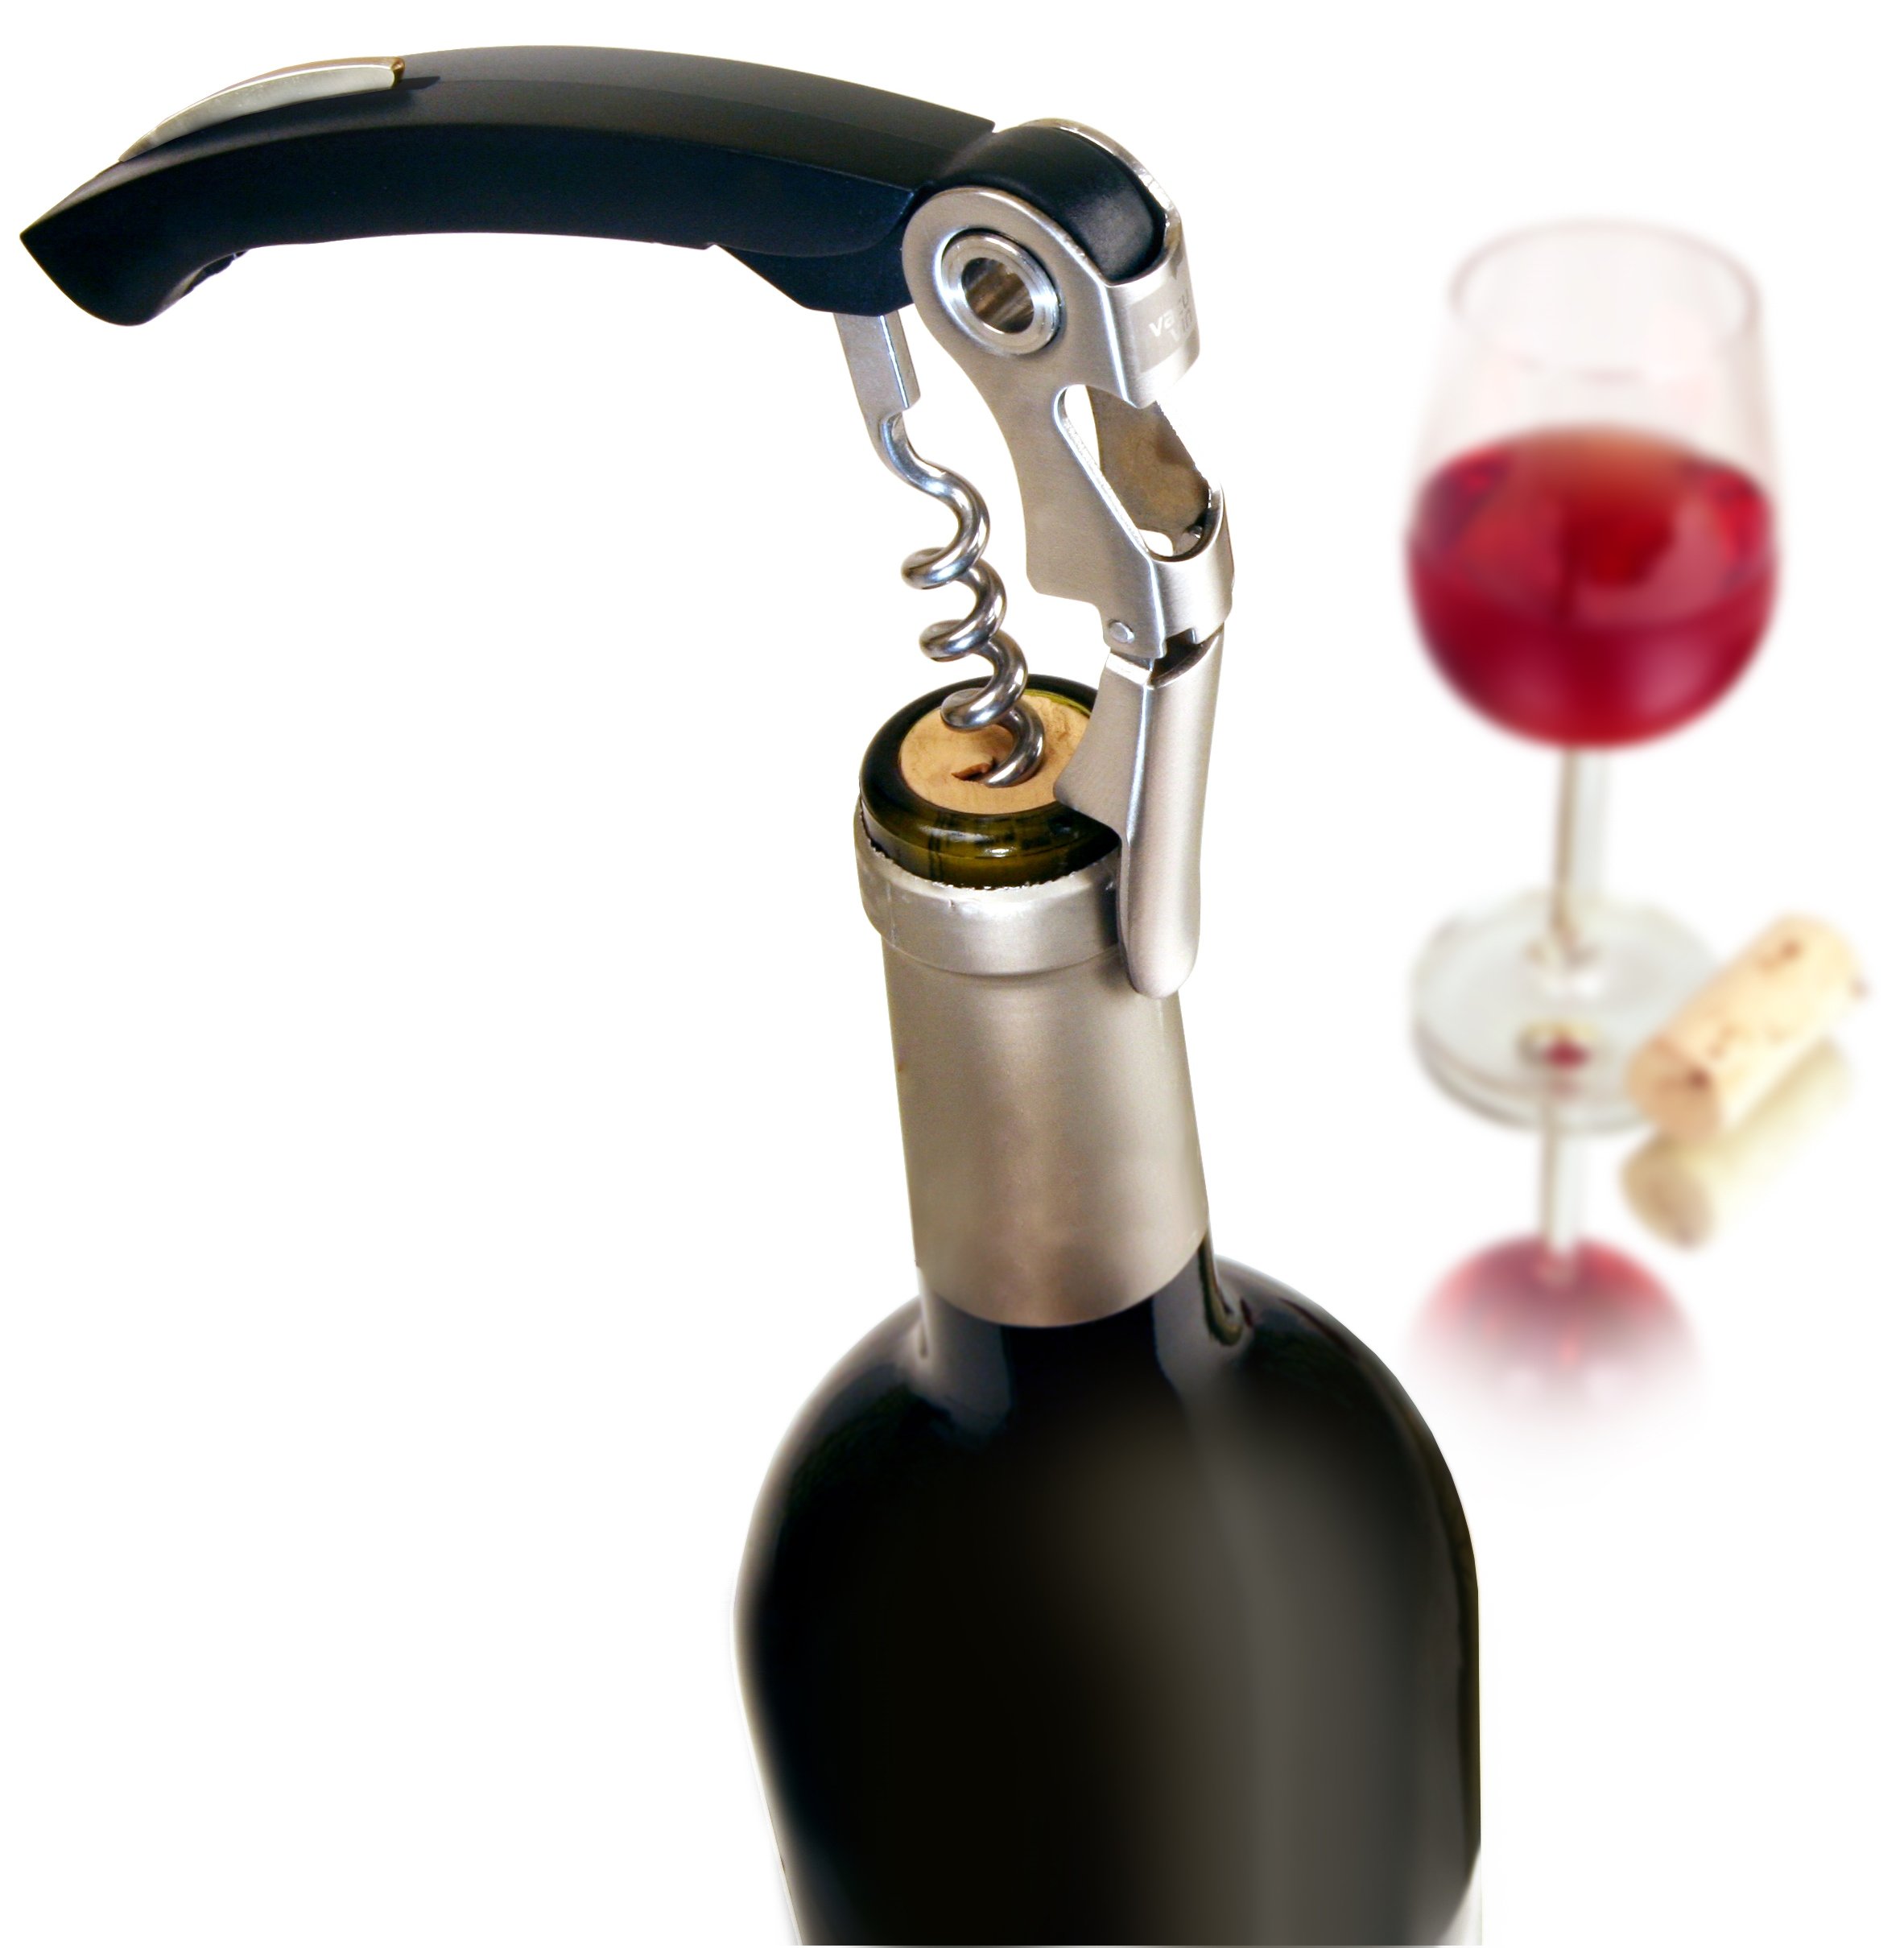 Vacu Vin Double Hinged Corkscrew - 3-in-1 Wine Opener with Foil Cutter and Bottle Opener - Effortlessly Open Wine Bottles and More - Professional Grade Corkscrew